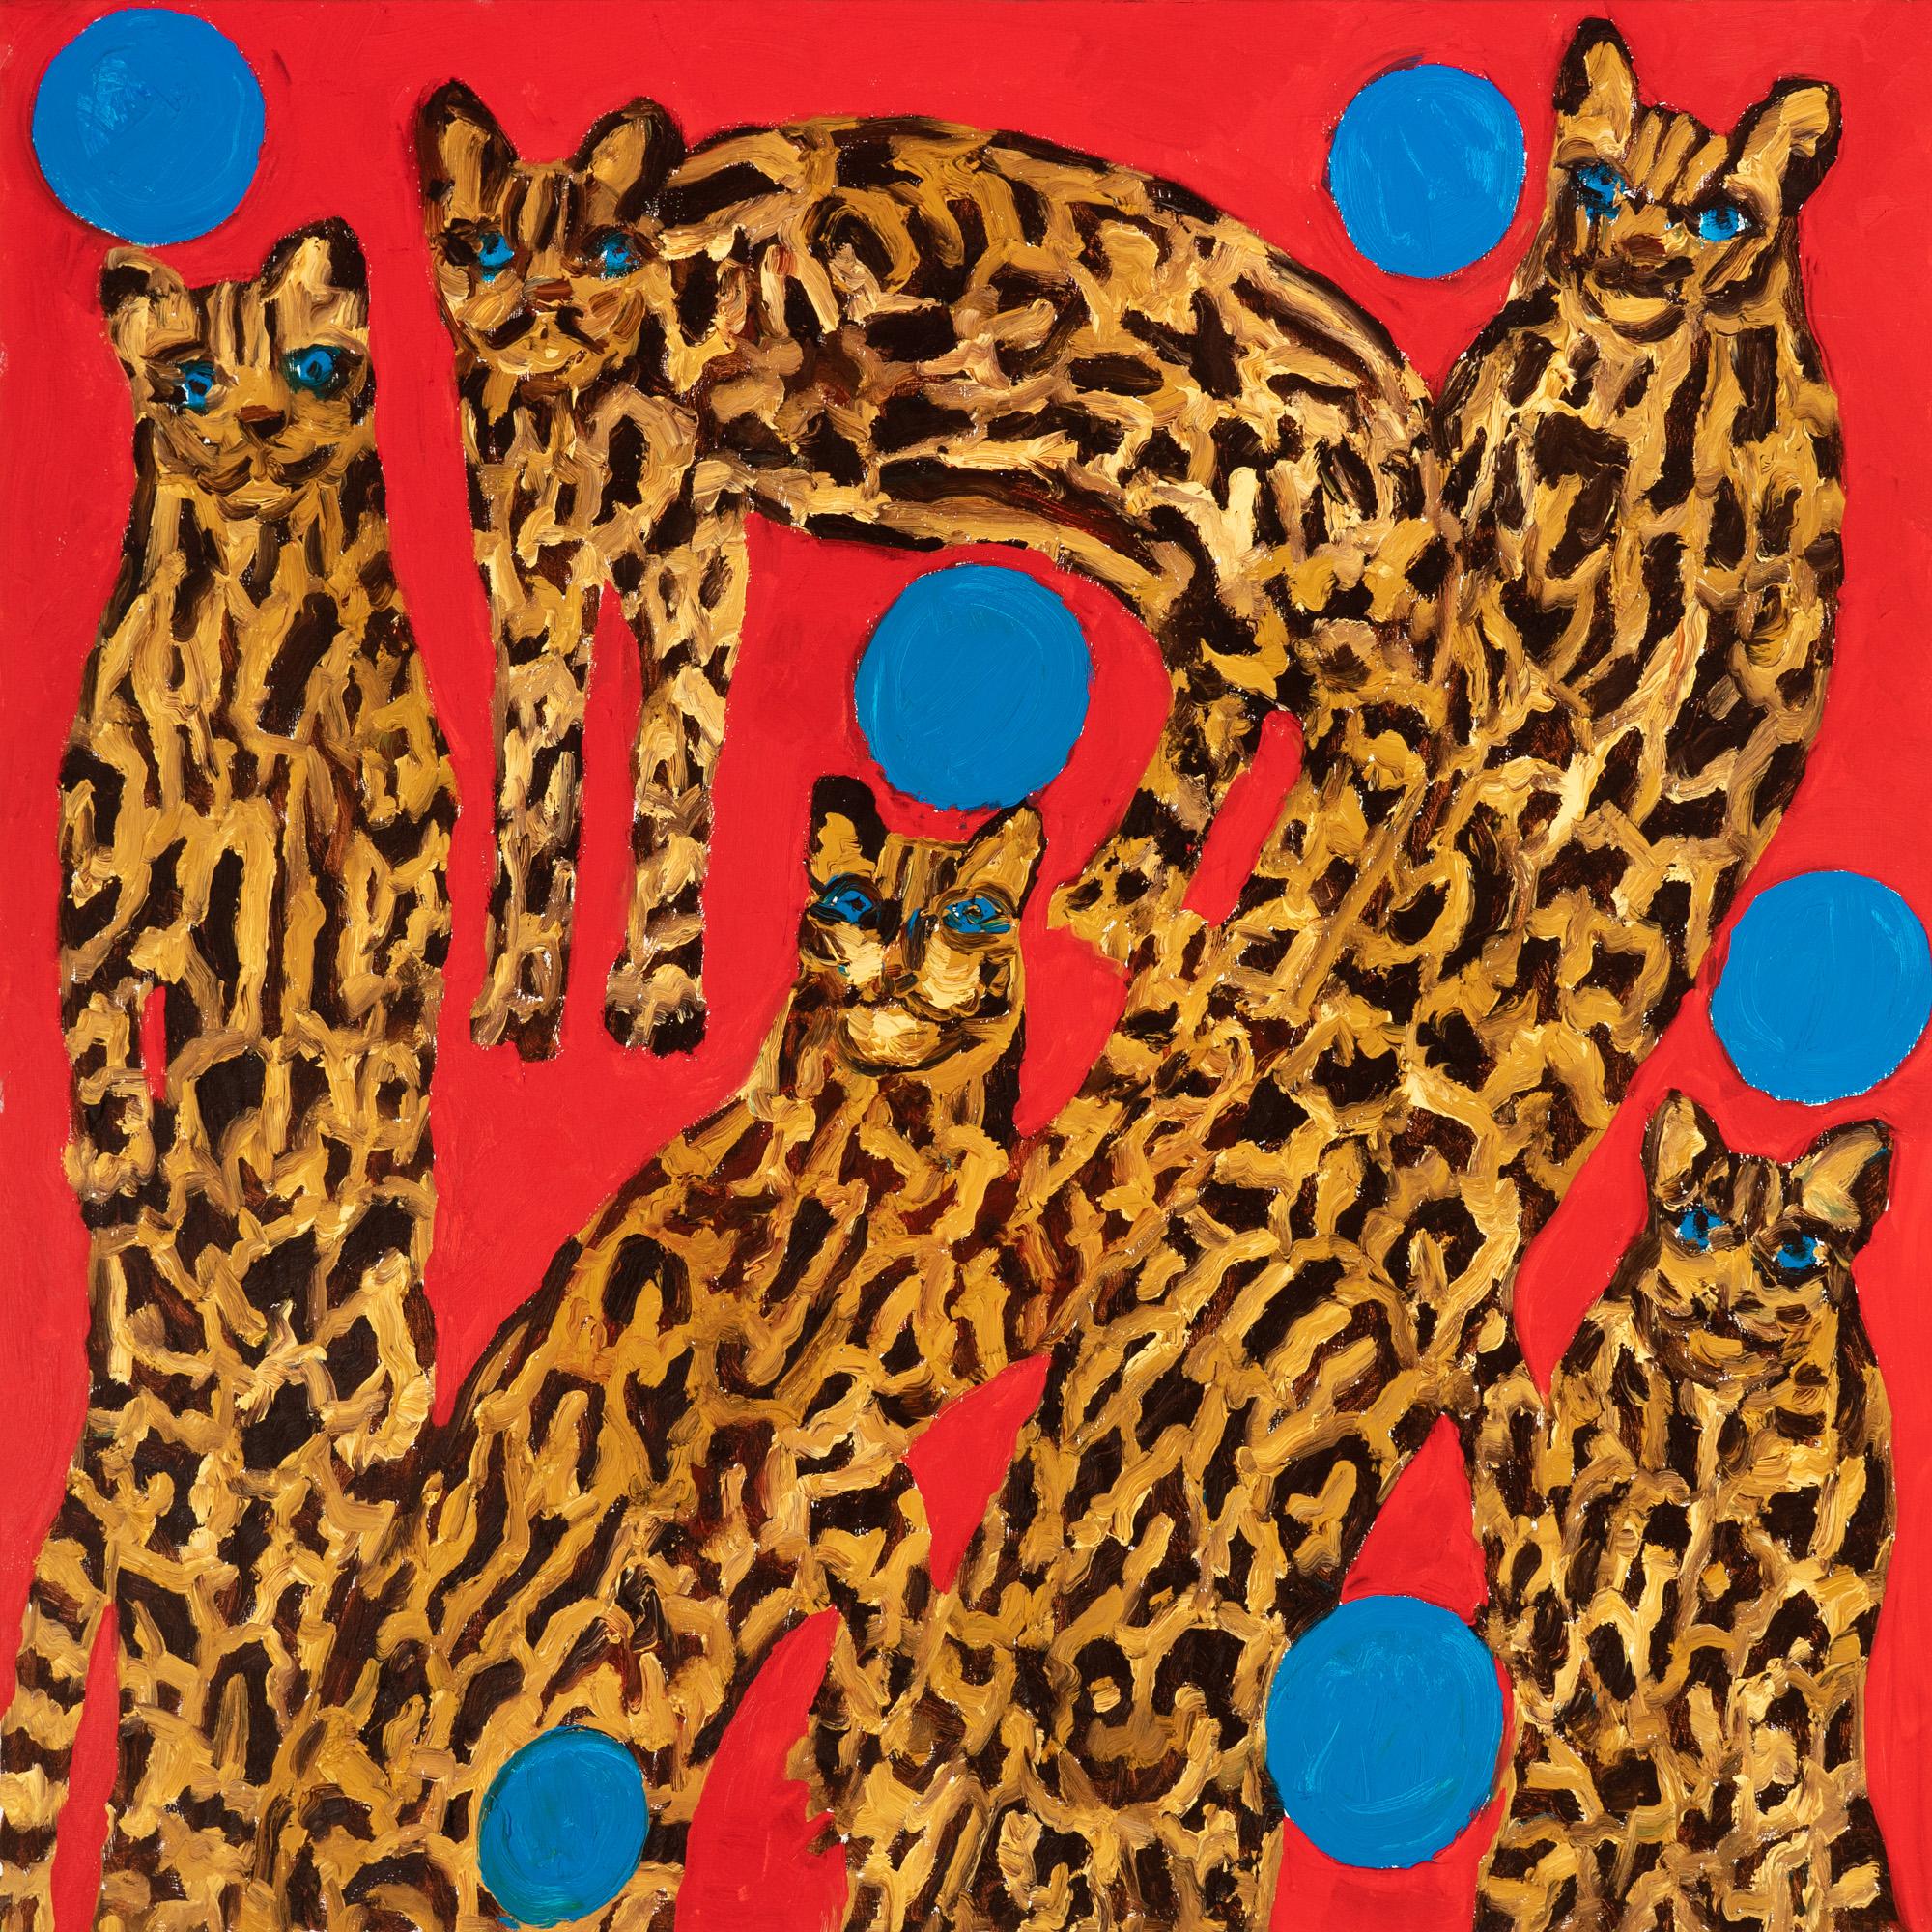 "Ocelots" is an unframed oil on canvas painting by Hunt Slonem, depicting a group of ocelots with 6 blue floating balls against a red background. The artist's expressive brushstrokes and electric primary colors evoke a sense of whimsy and play